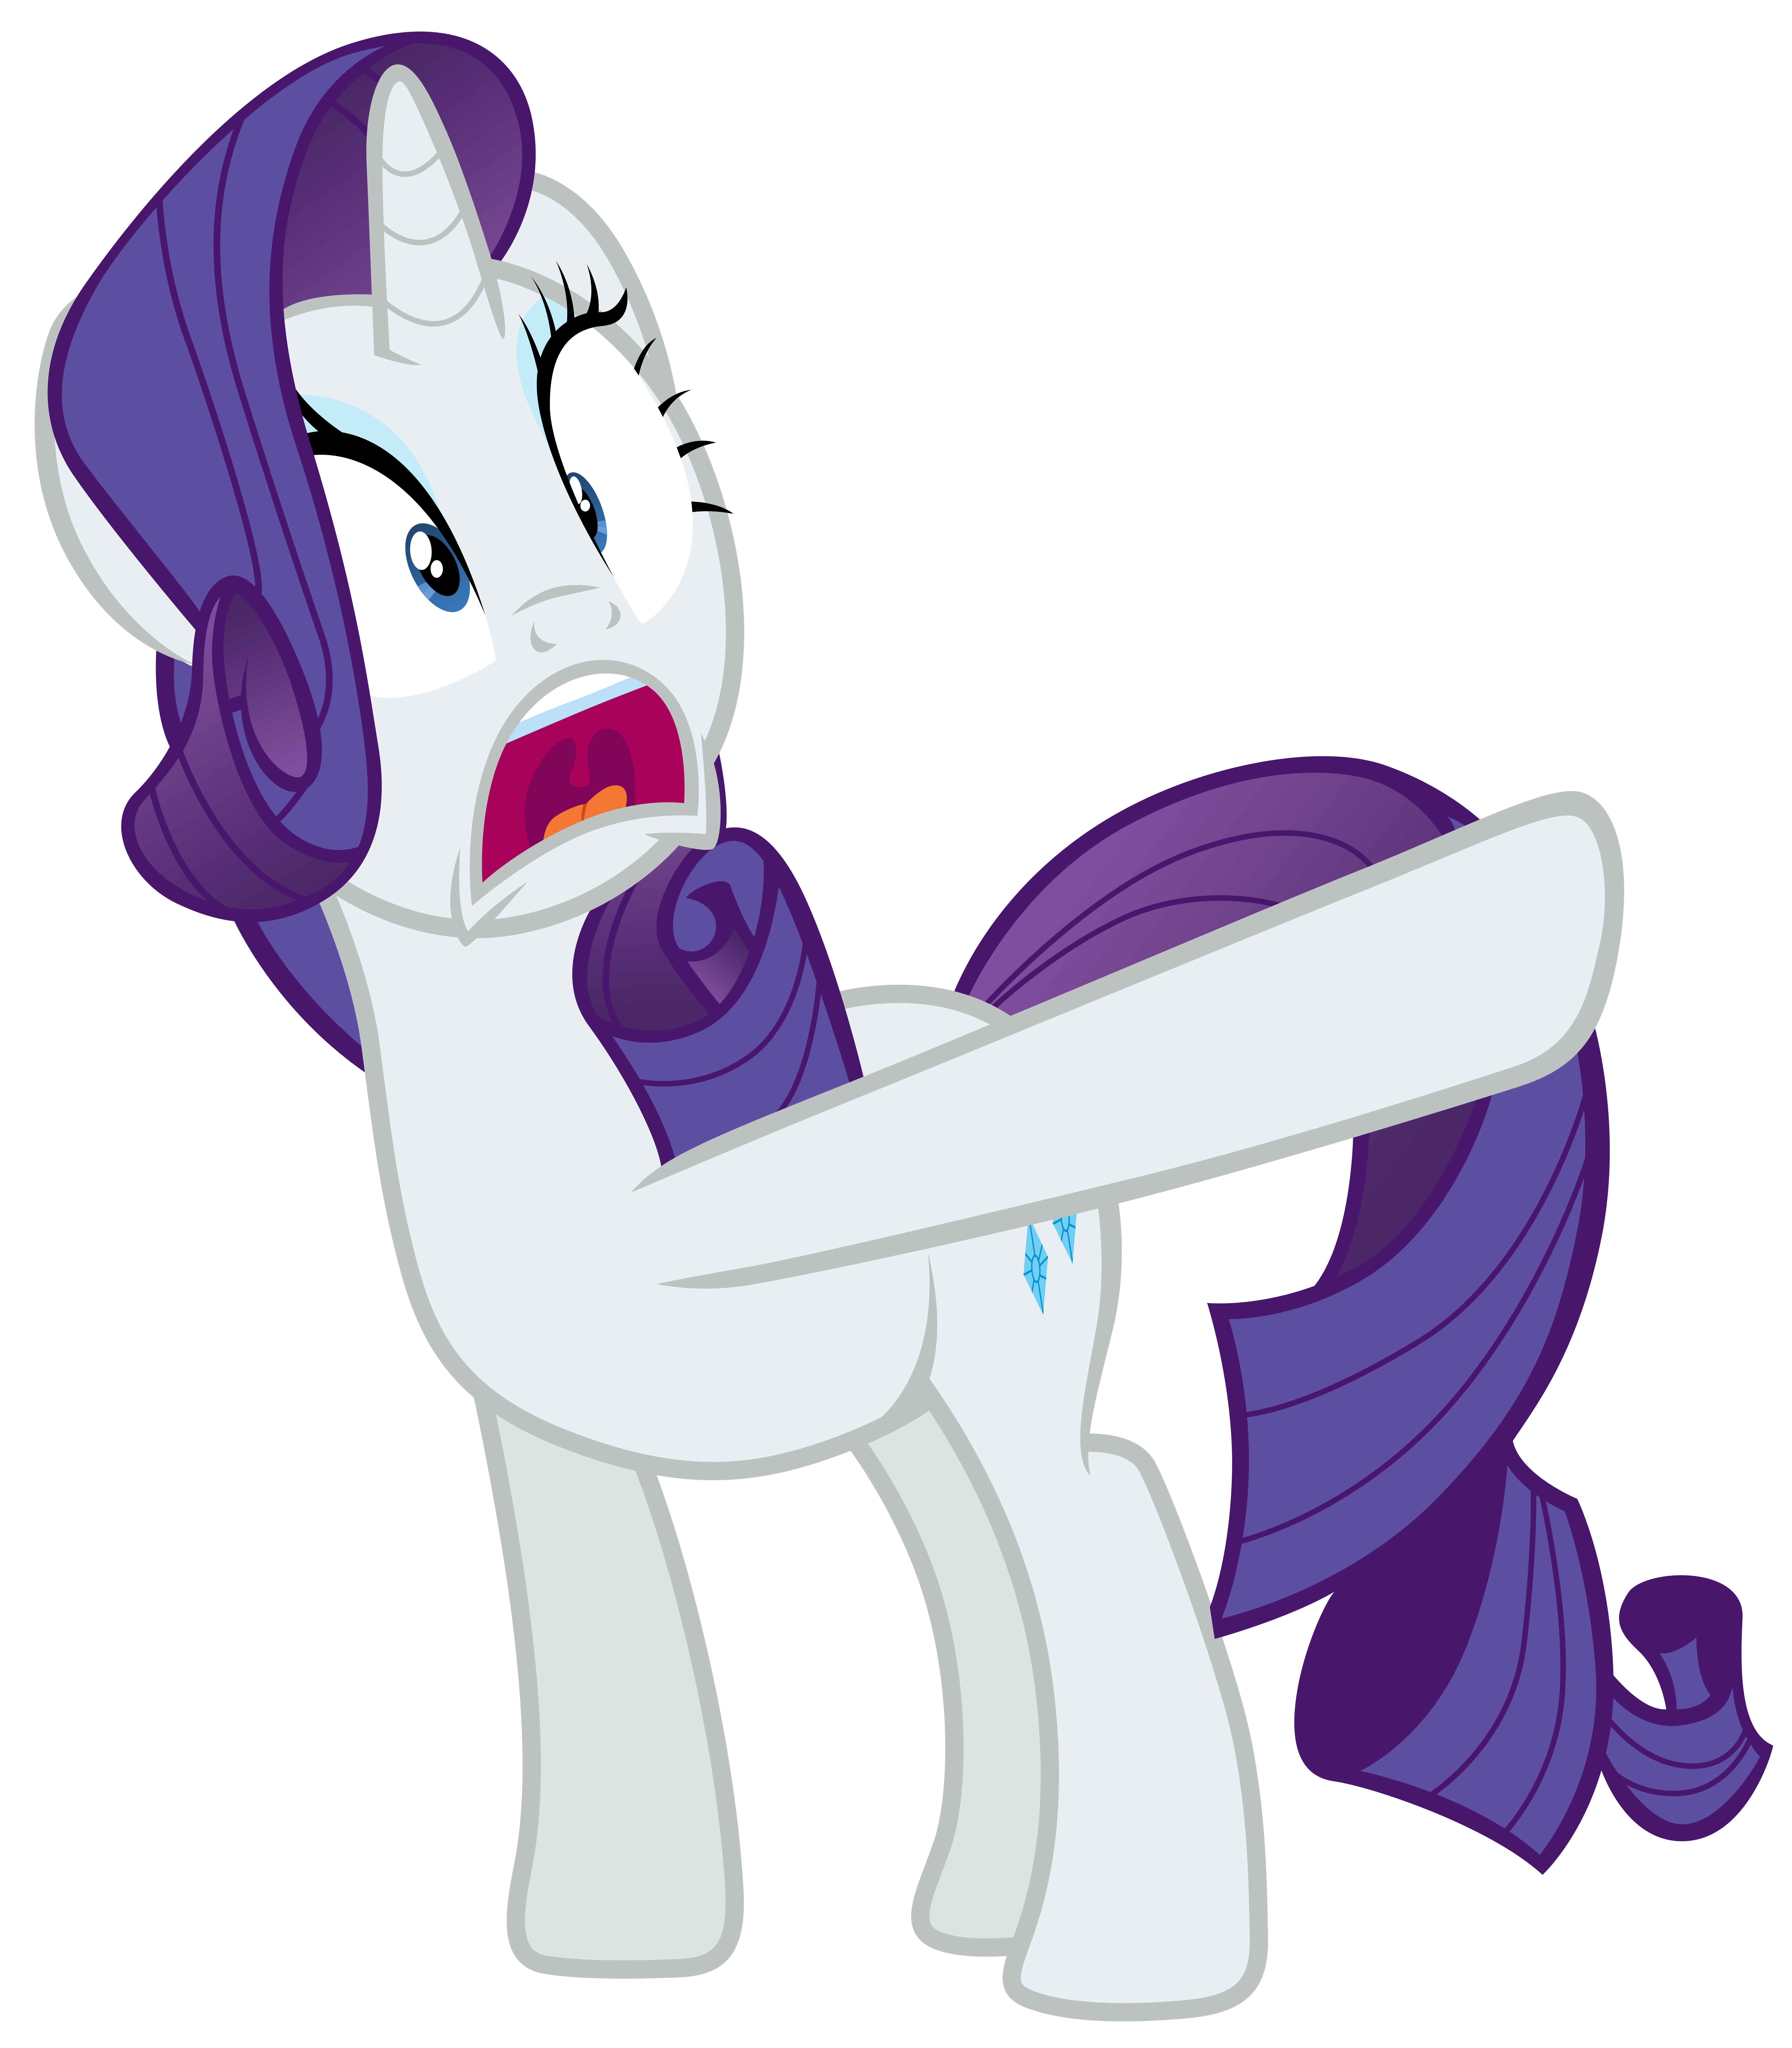 Rarity in shock and pointing her hoof